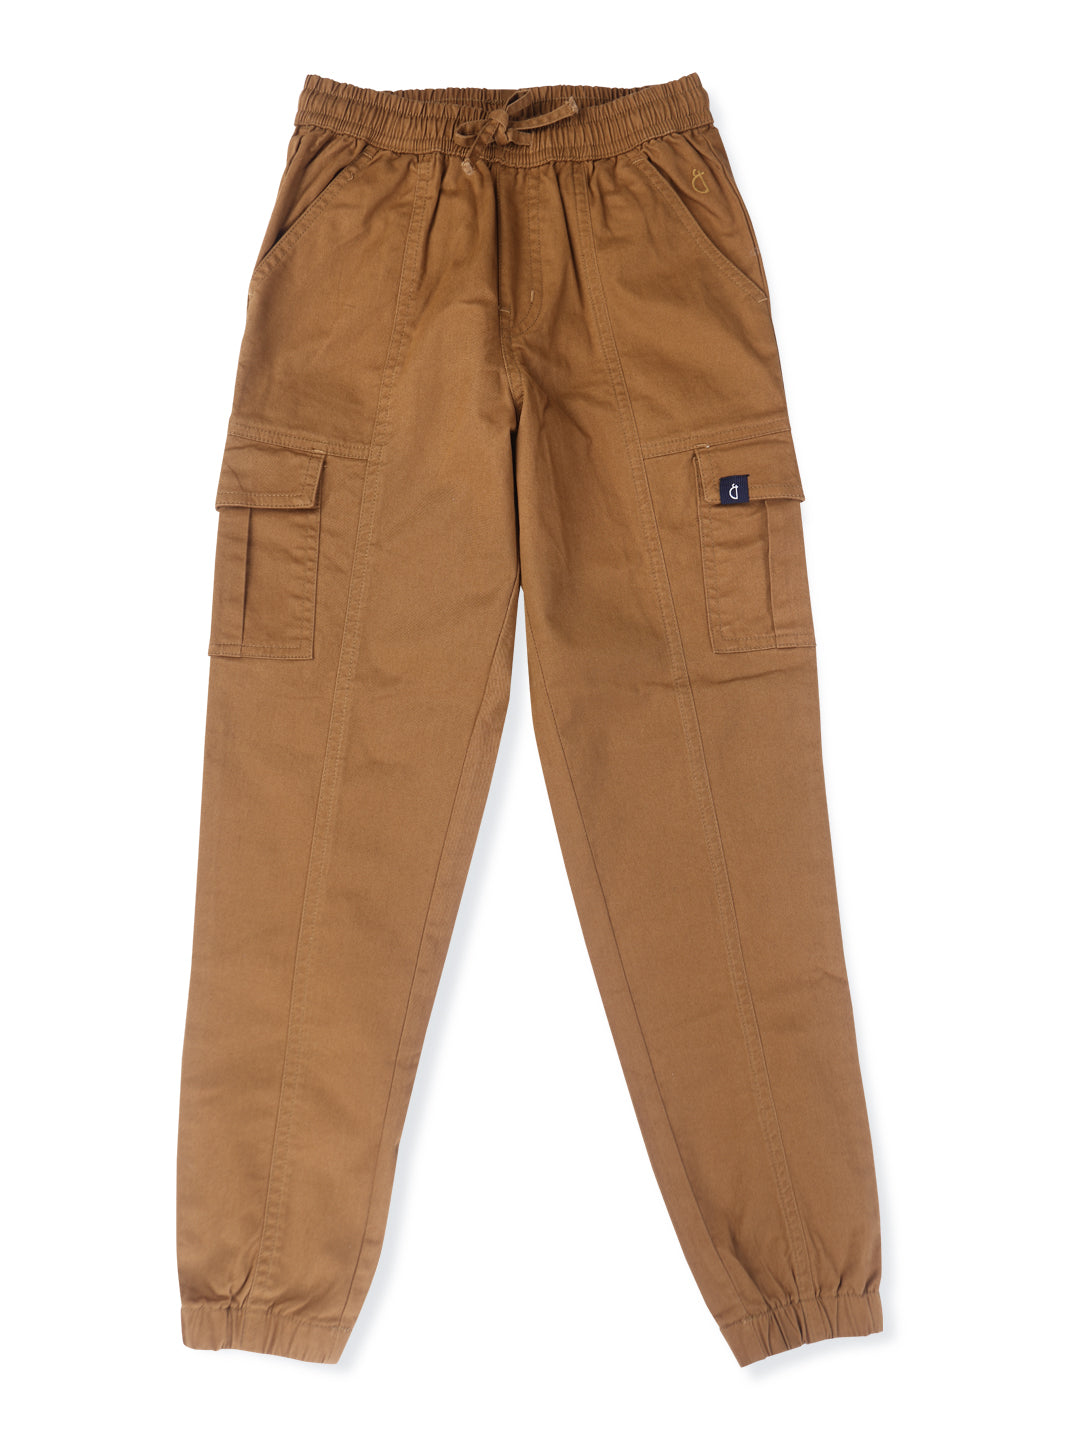 Boys Brown Cotton Solid Trouser